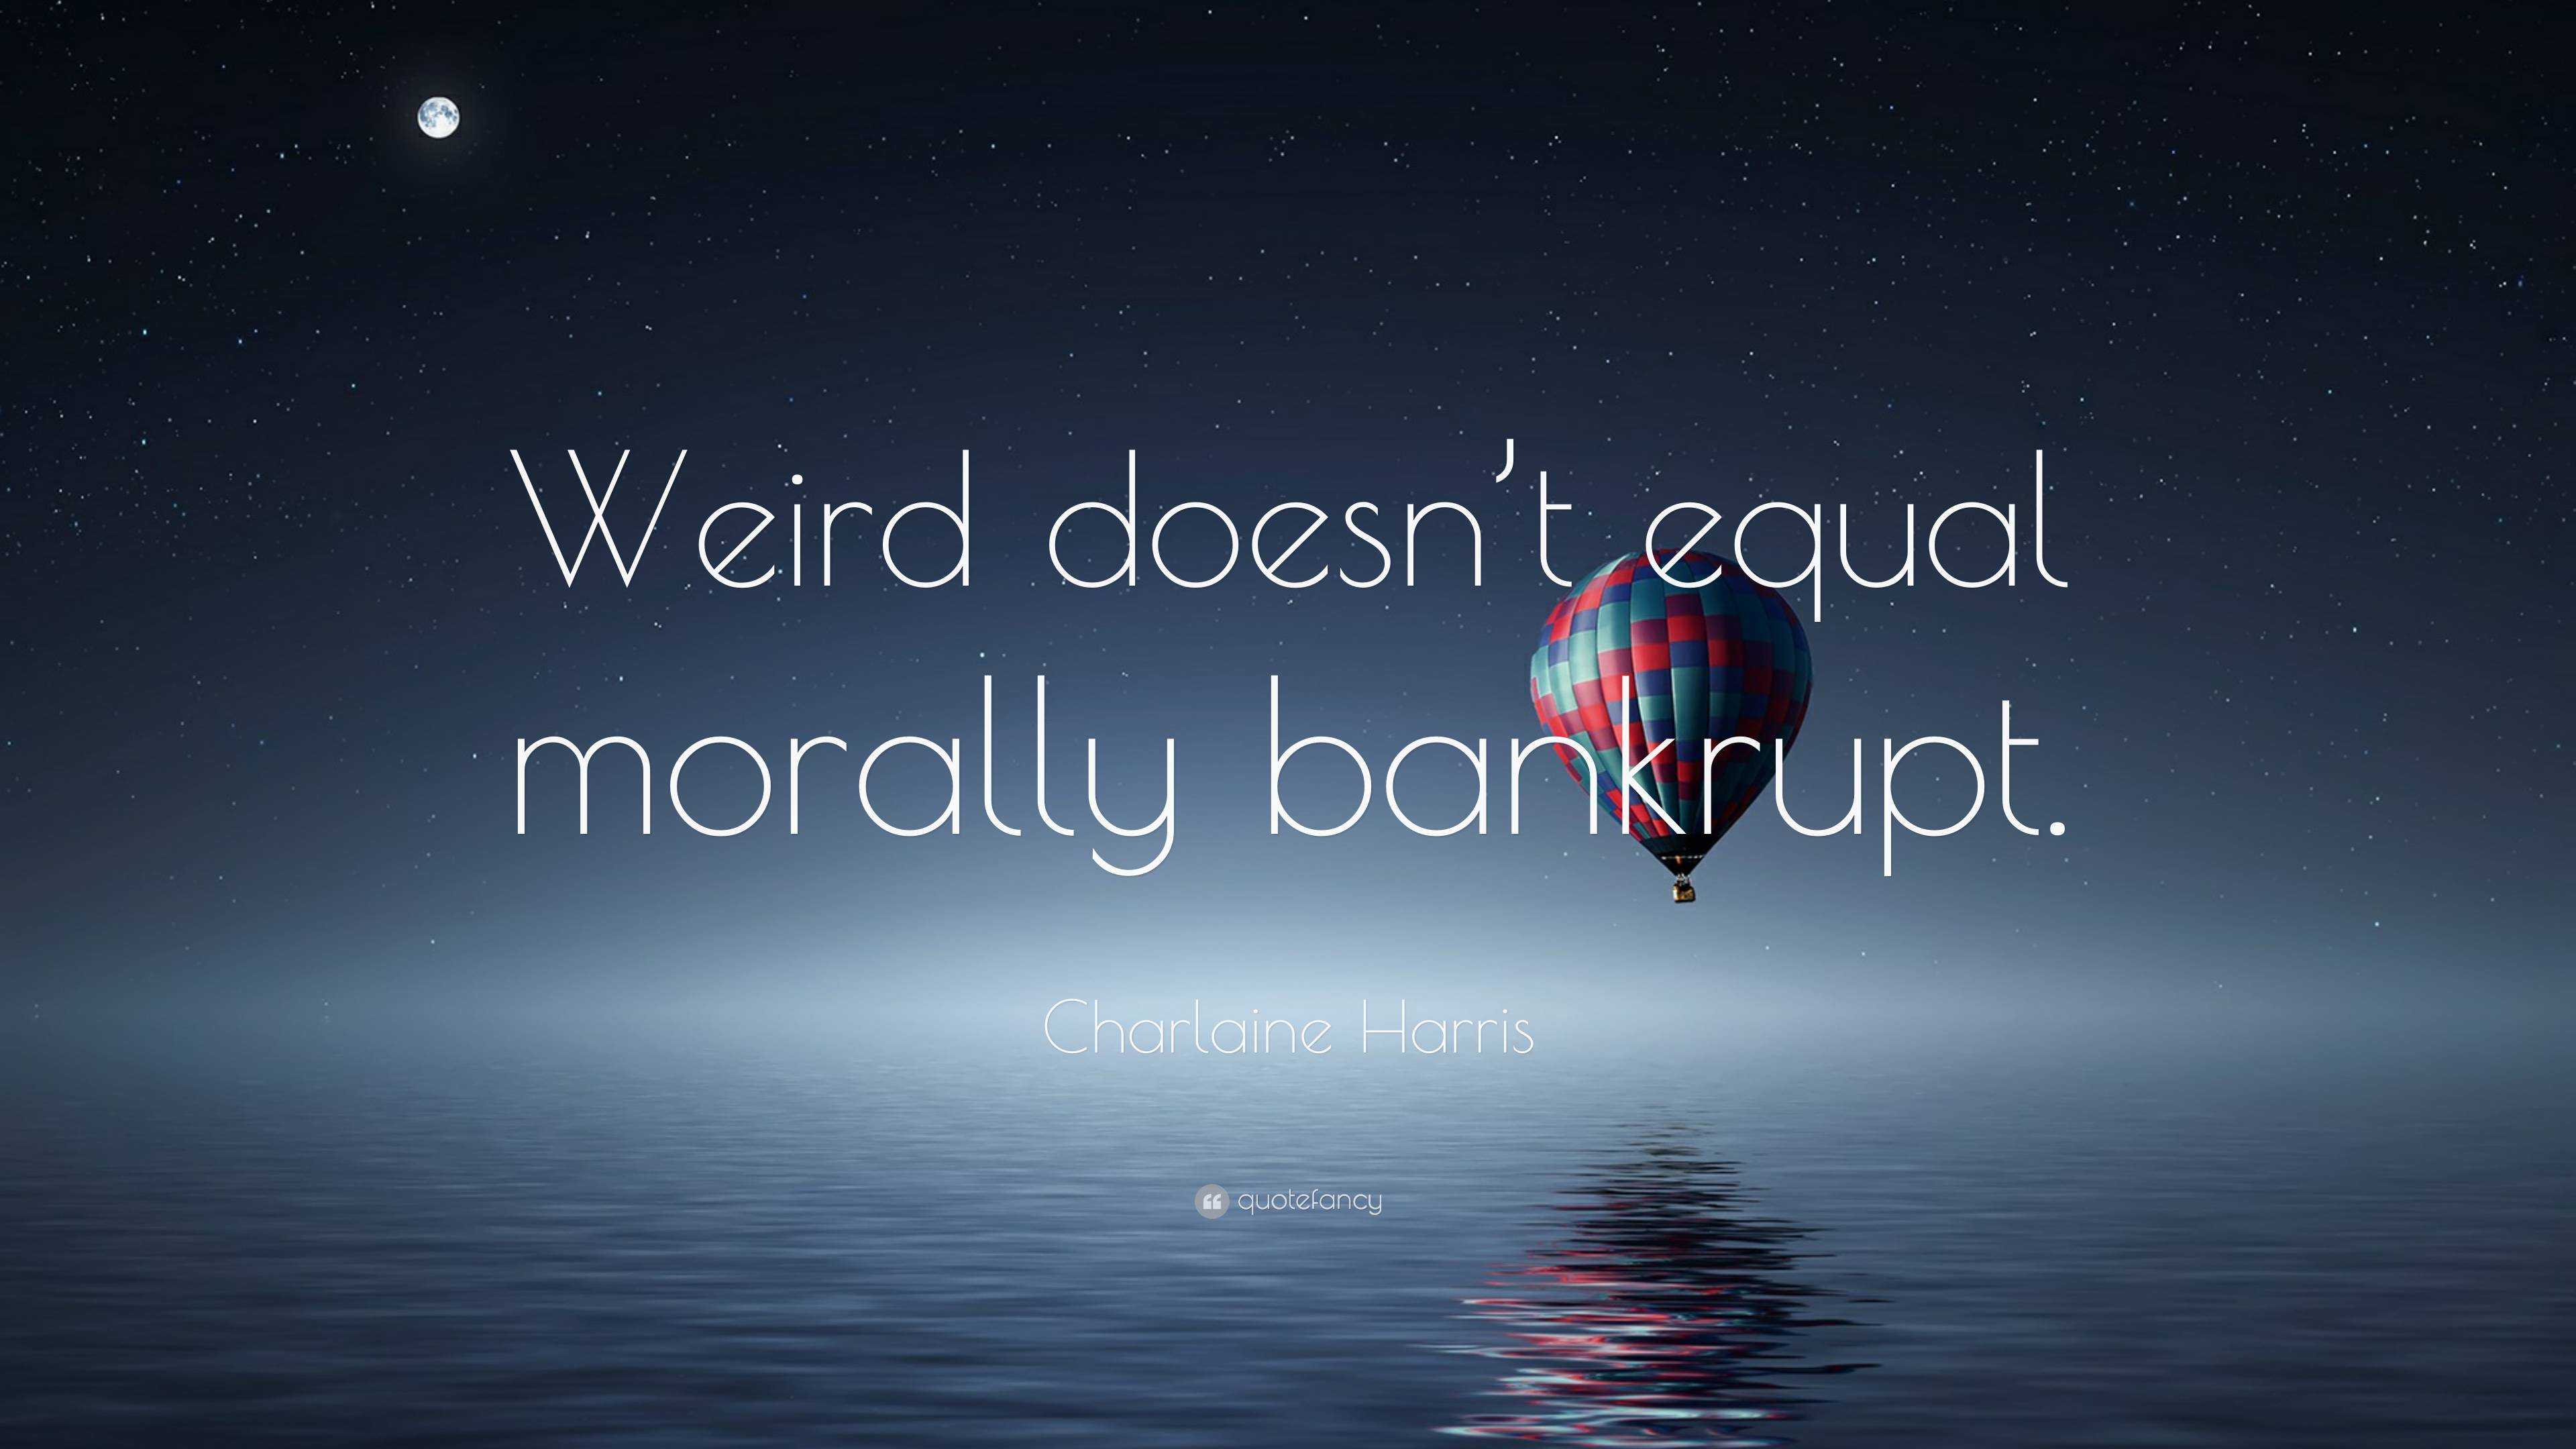 Charlaine Harris Quote: “Weird doesn’t equal morally bankrupt.”